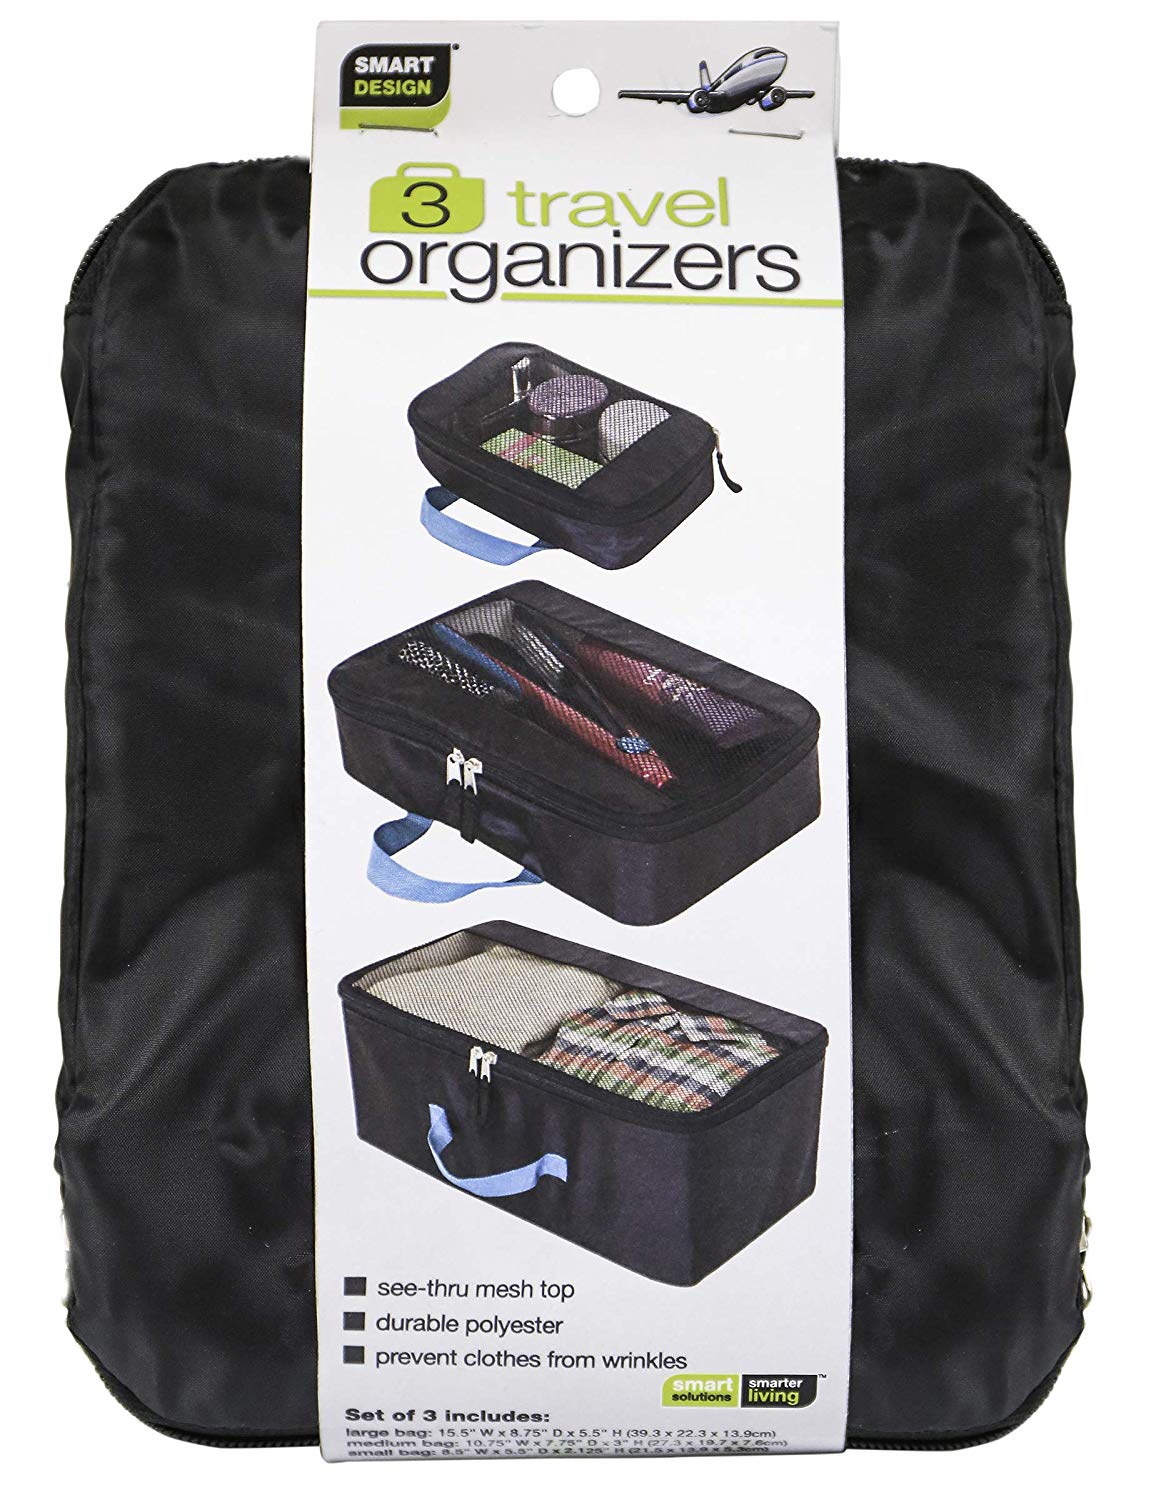 Smart Design Mesh Bags Small, Medium, & Large Bags w/ Reinforced Handle & Zippered Tops - Heavy Duty Polyester Material - for Travel & Storage - Home